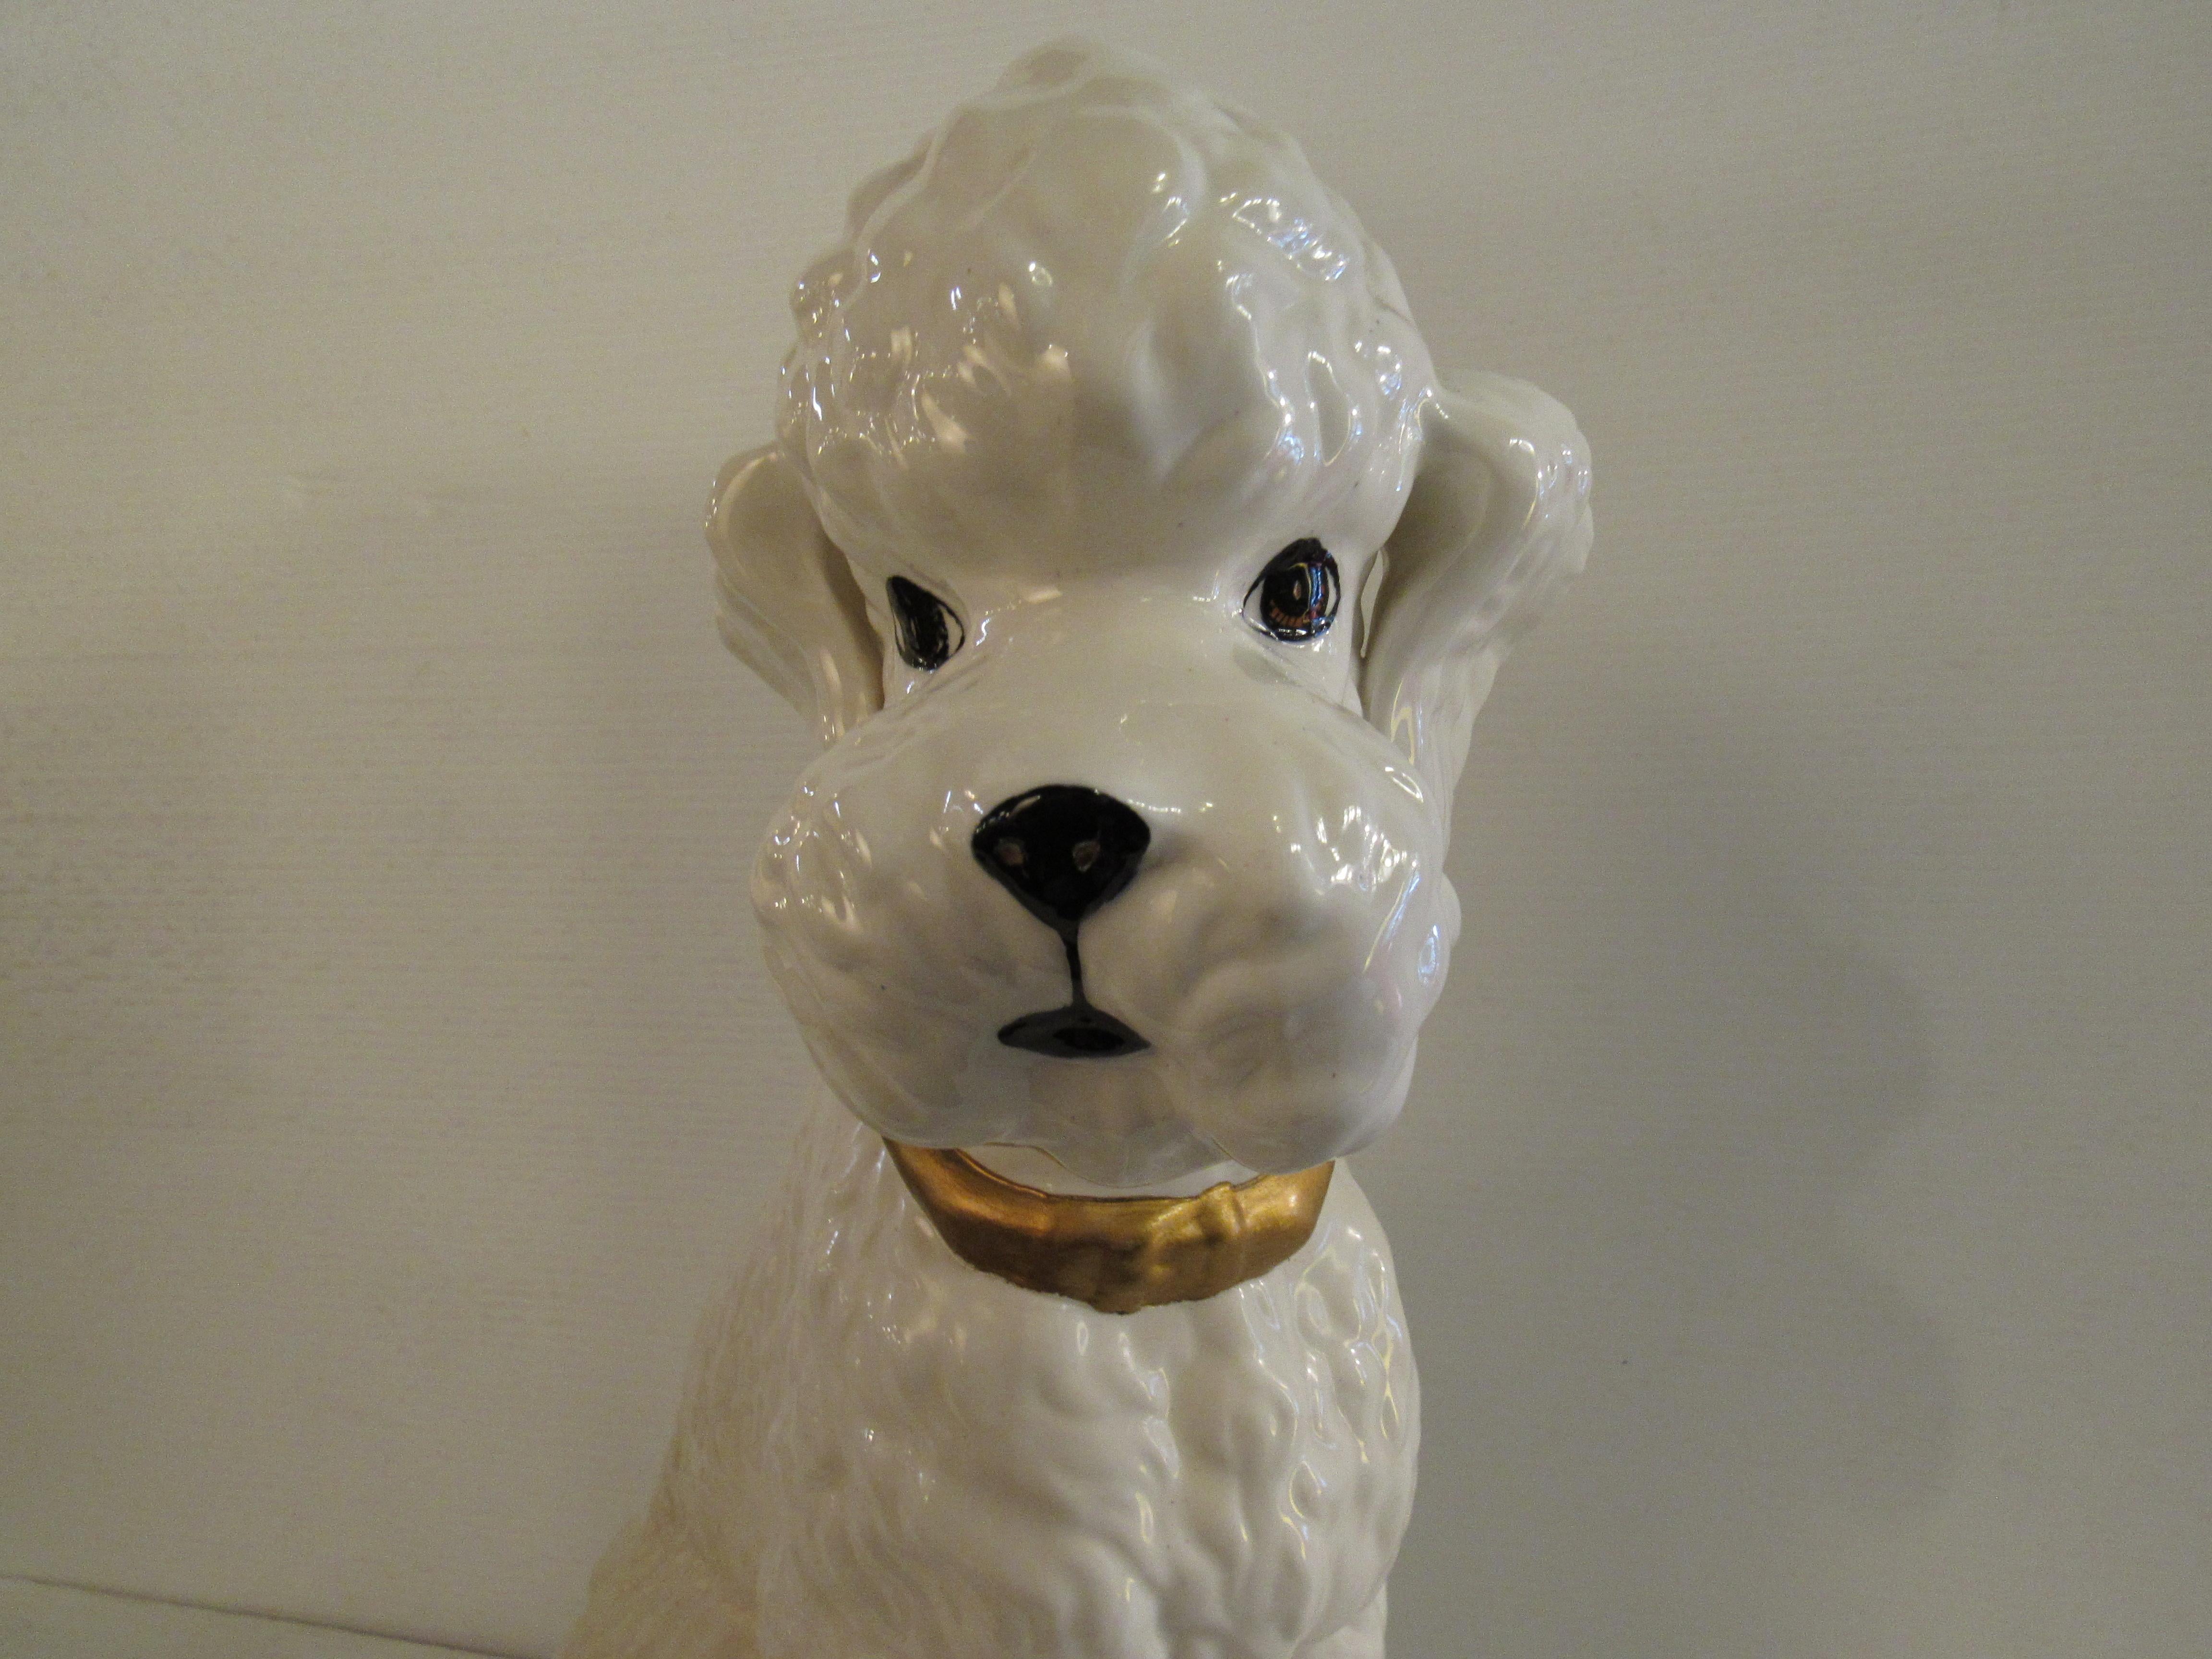 This ceramic poodle sculpture was handmade and signed 